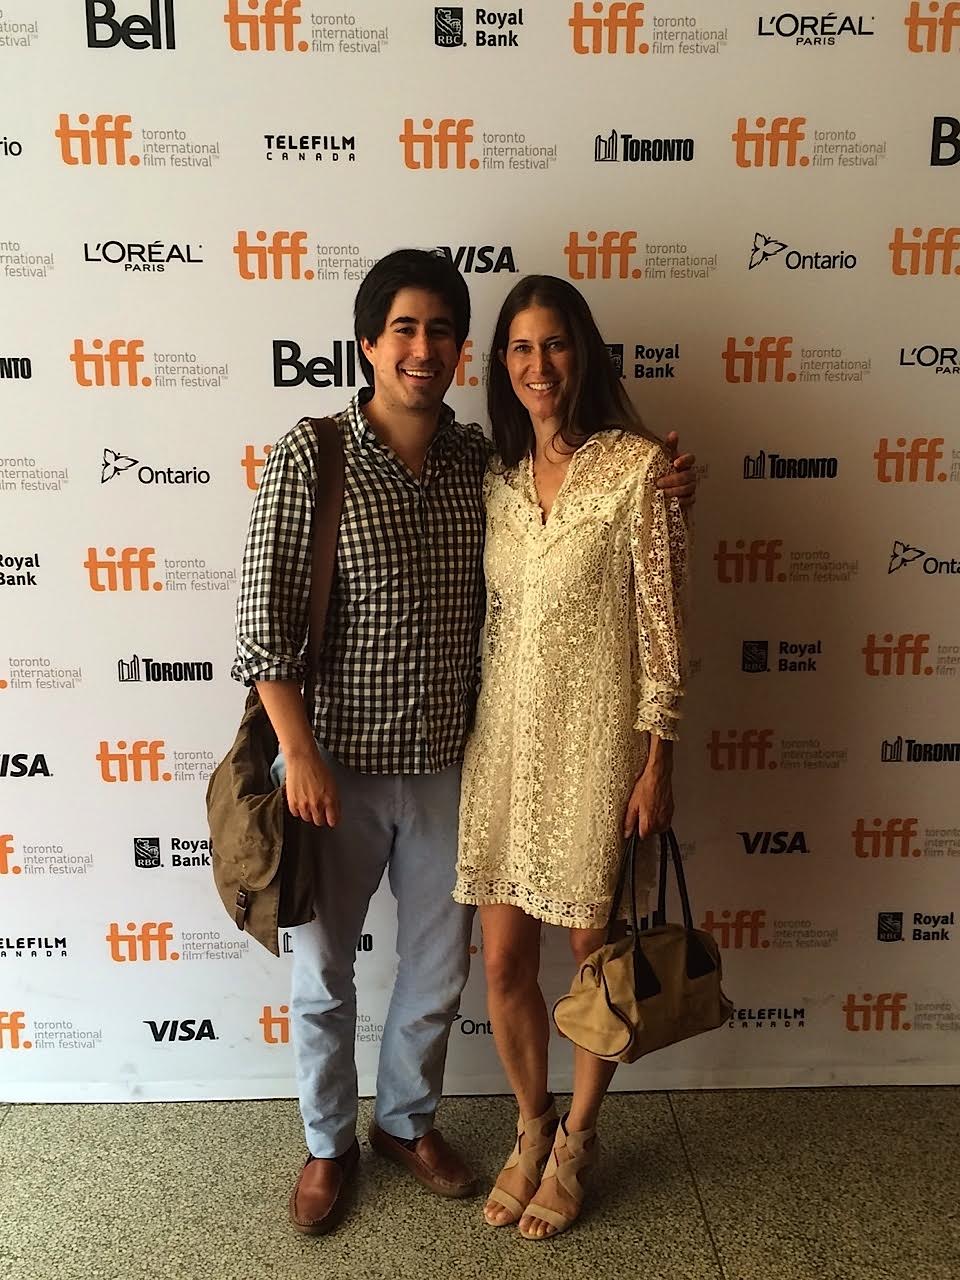 Dana Friedman (Producer, Right) at Toronto Intl. Film Festival for Learning to Drive with Daniel Hammond (Producer, Left)